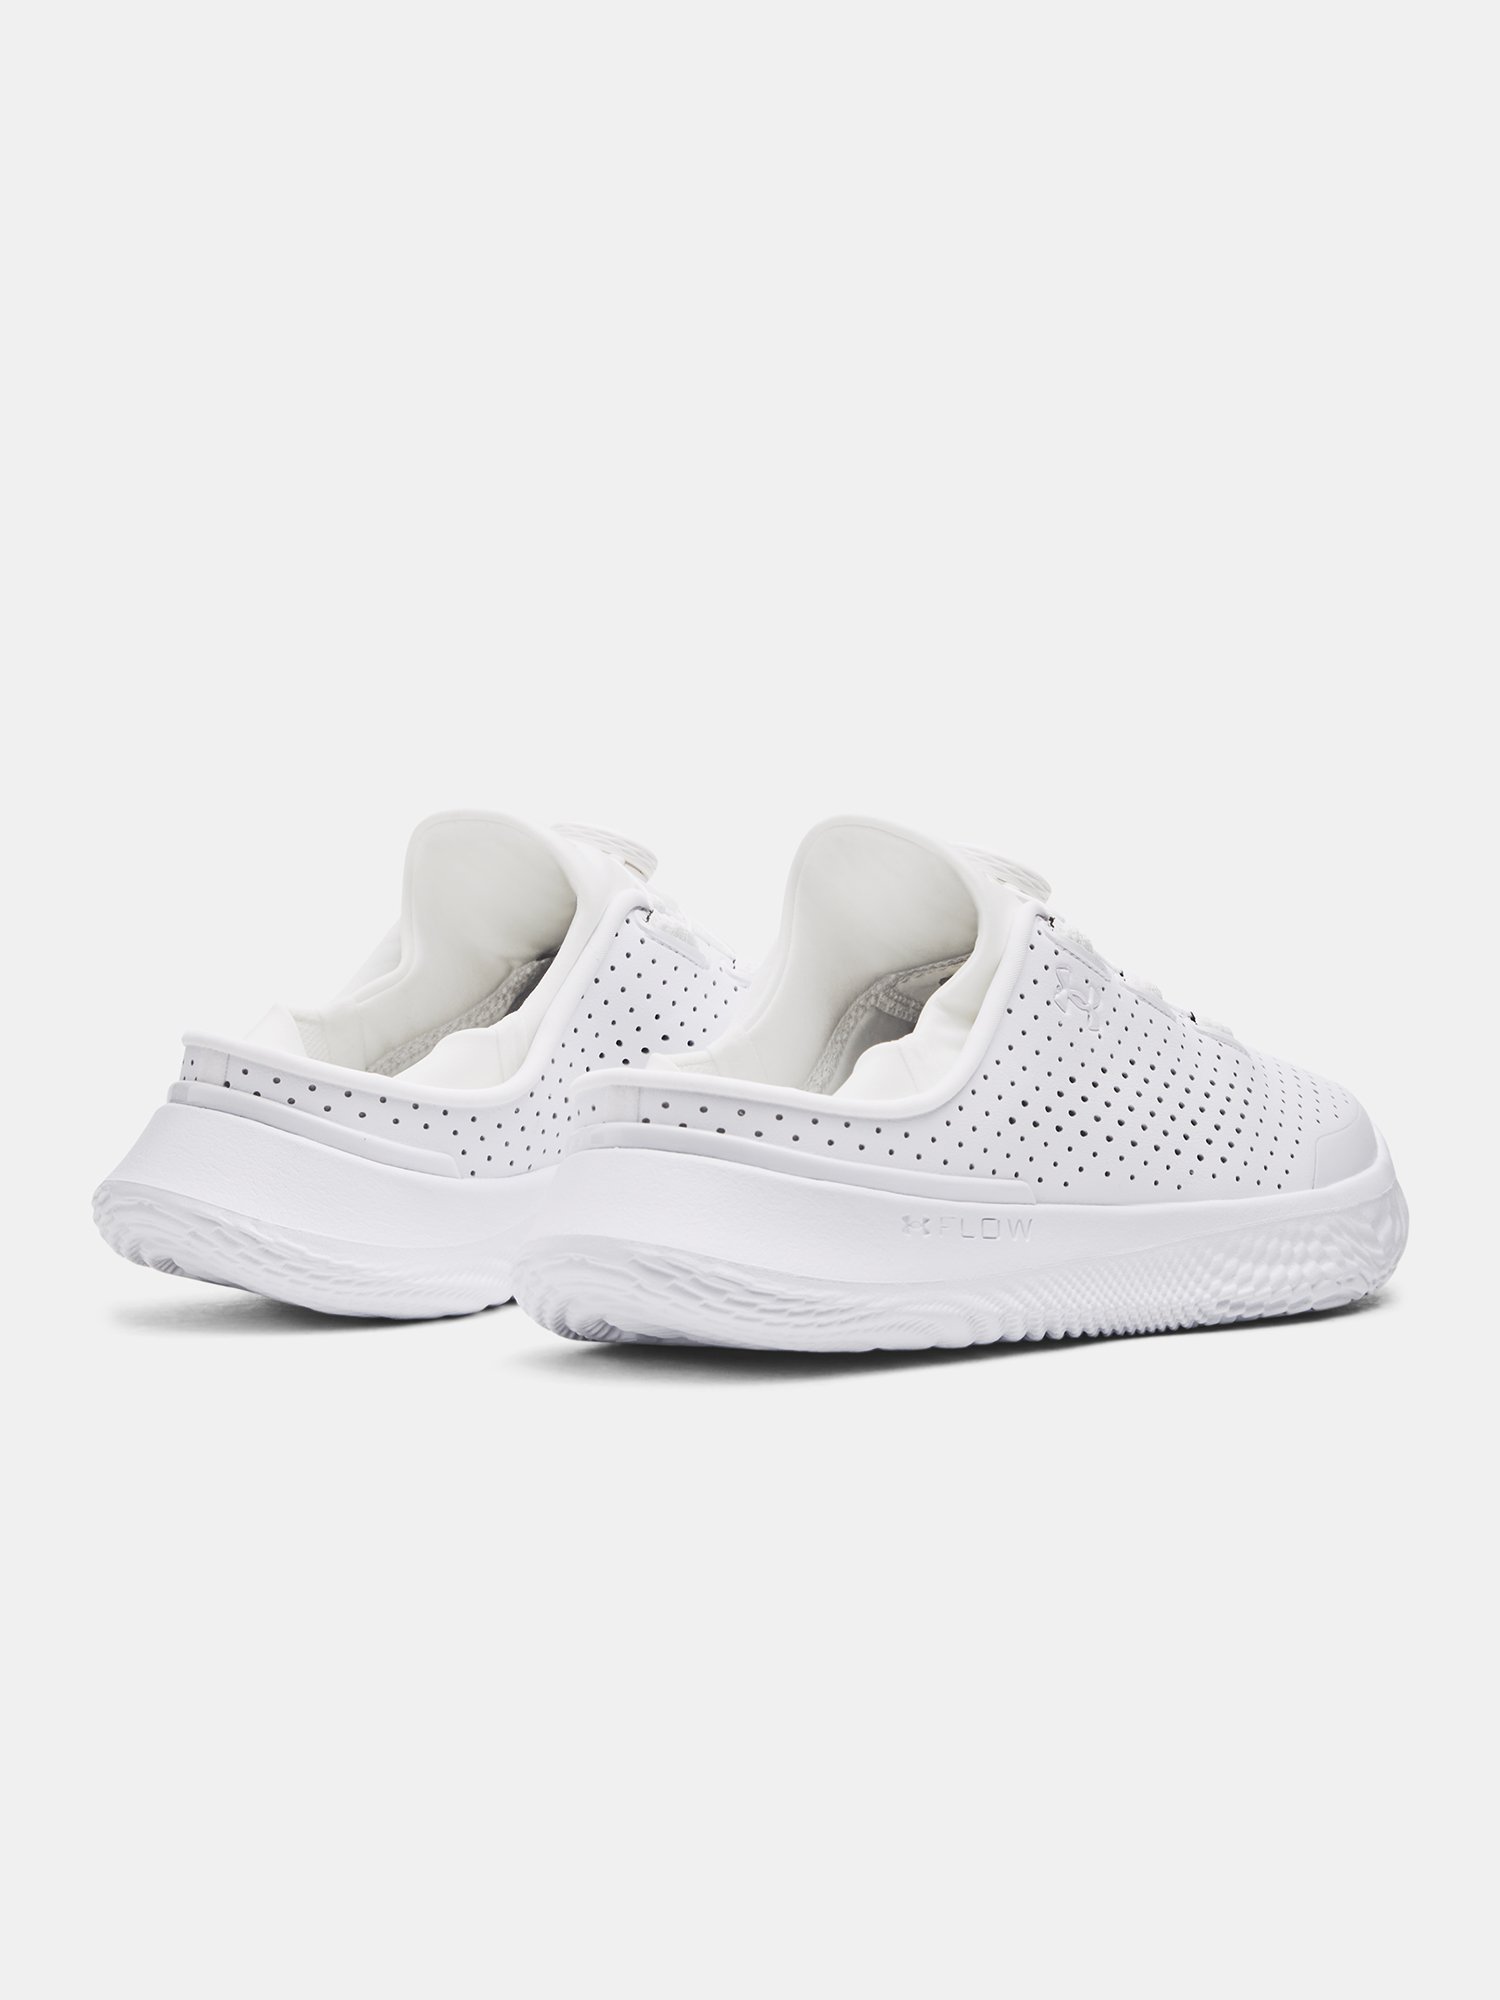 Topánky Under Armour UA Slipspeed Trainer SYN-WHT